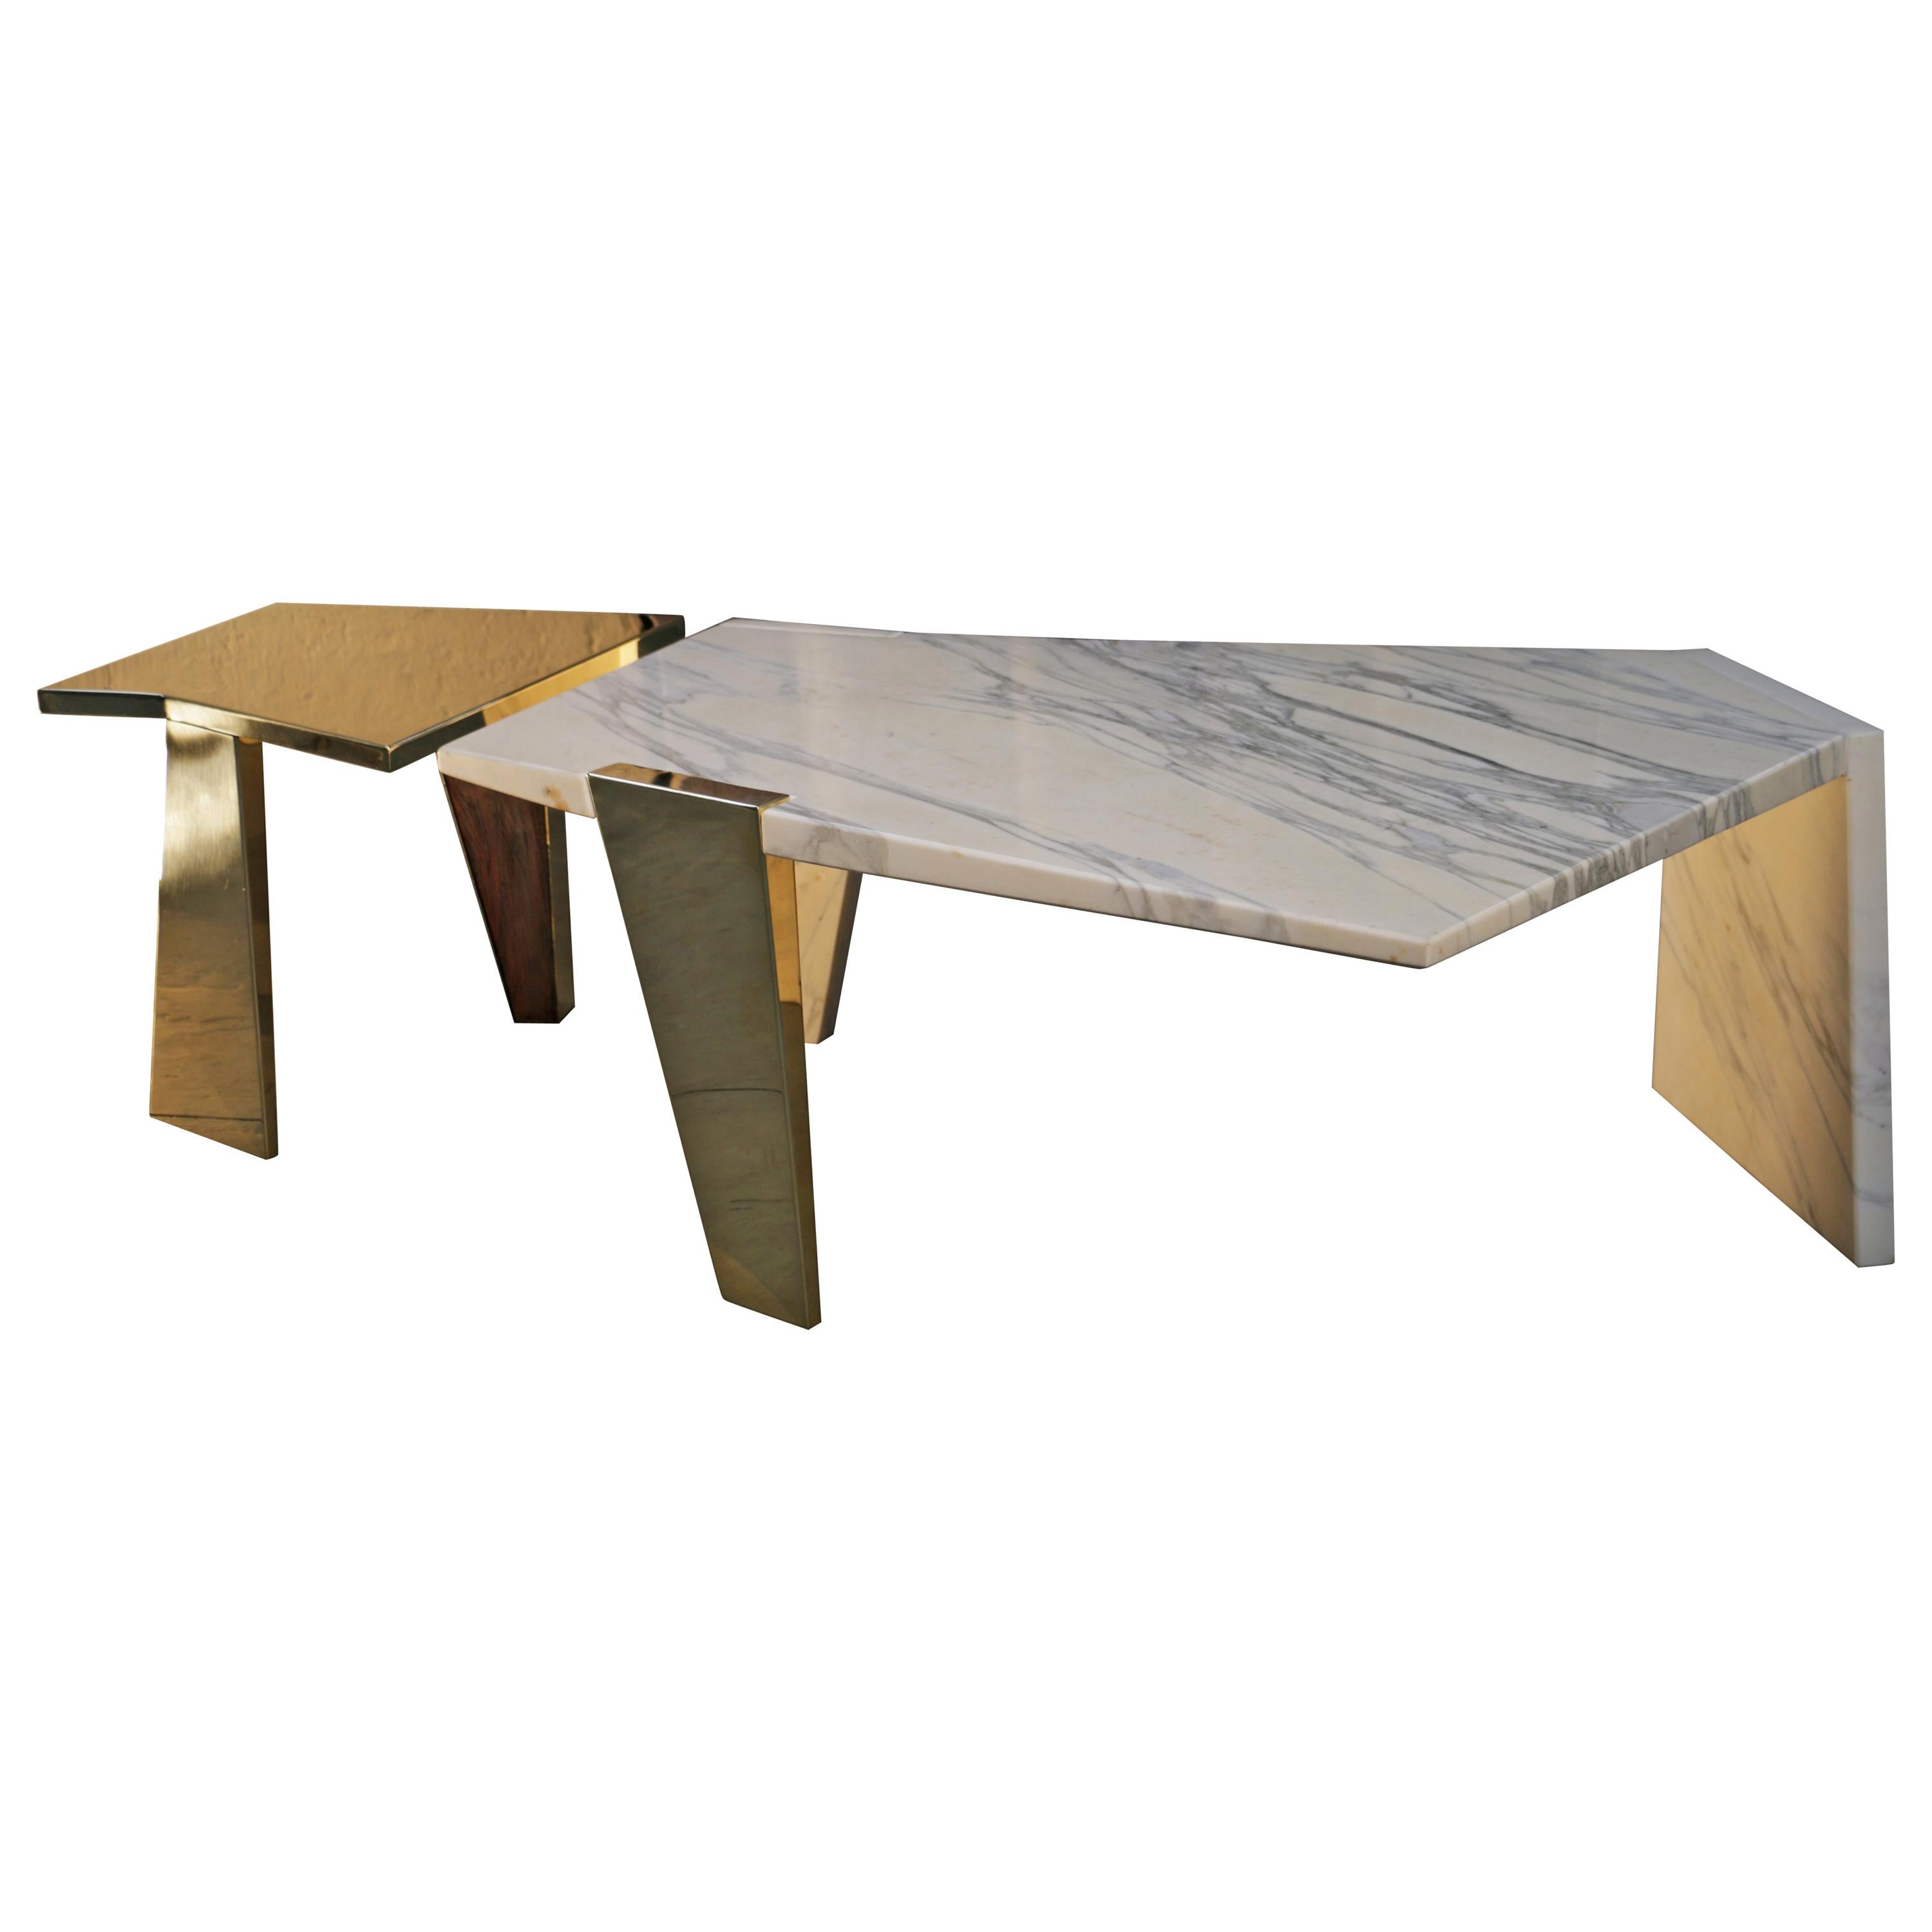 Minotaur, Sculptural Contemporary Coffee Table For Sale